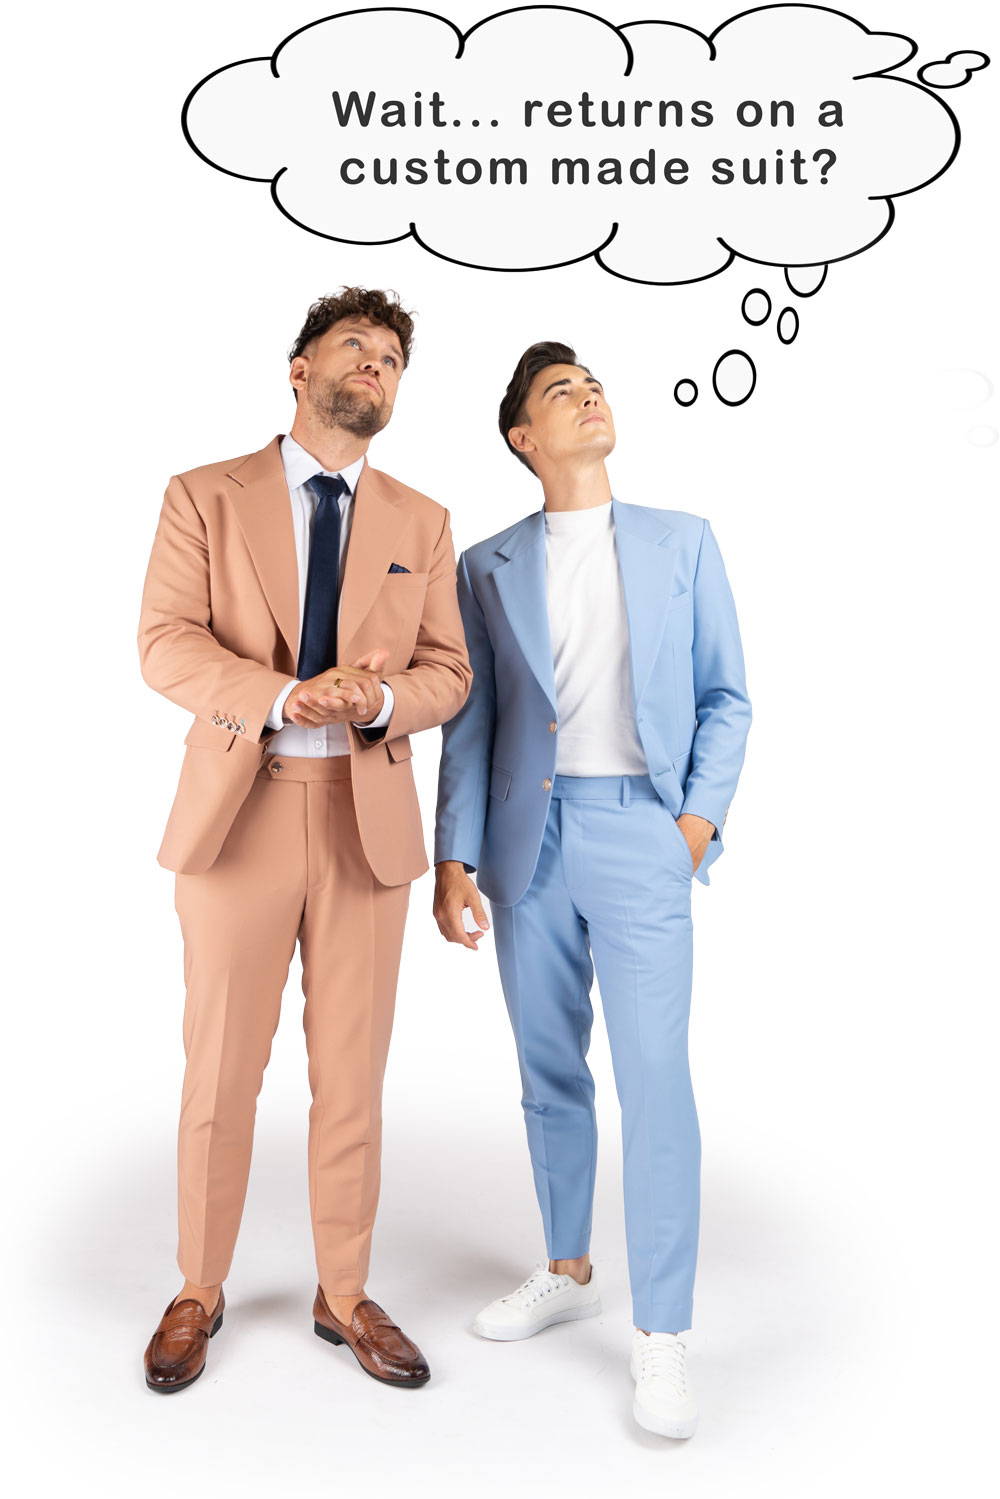 two men in suits pondering about getting a return on their suit